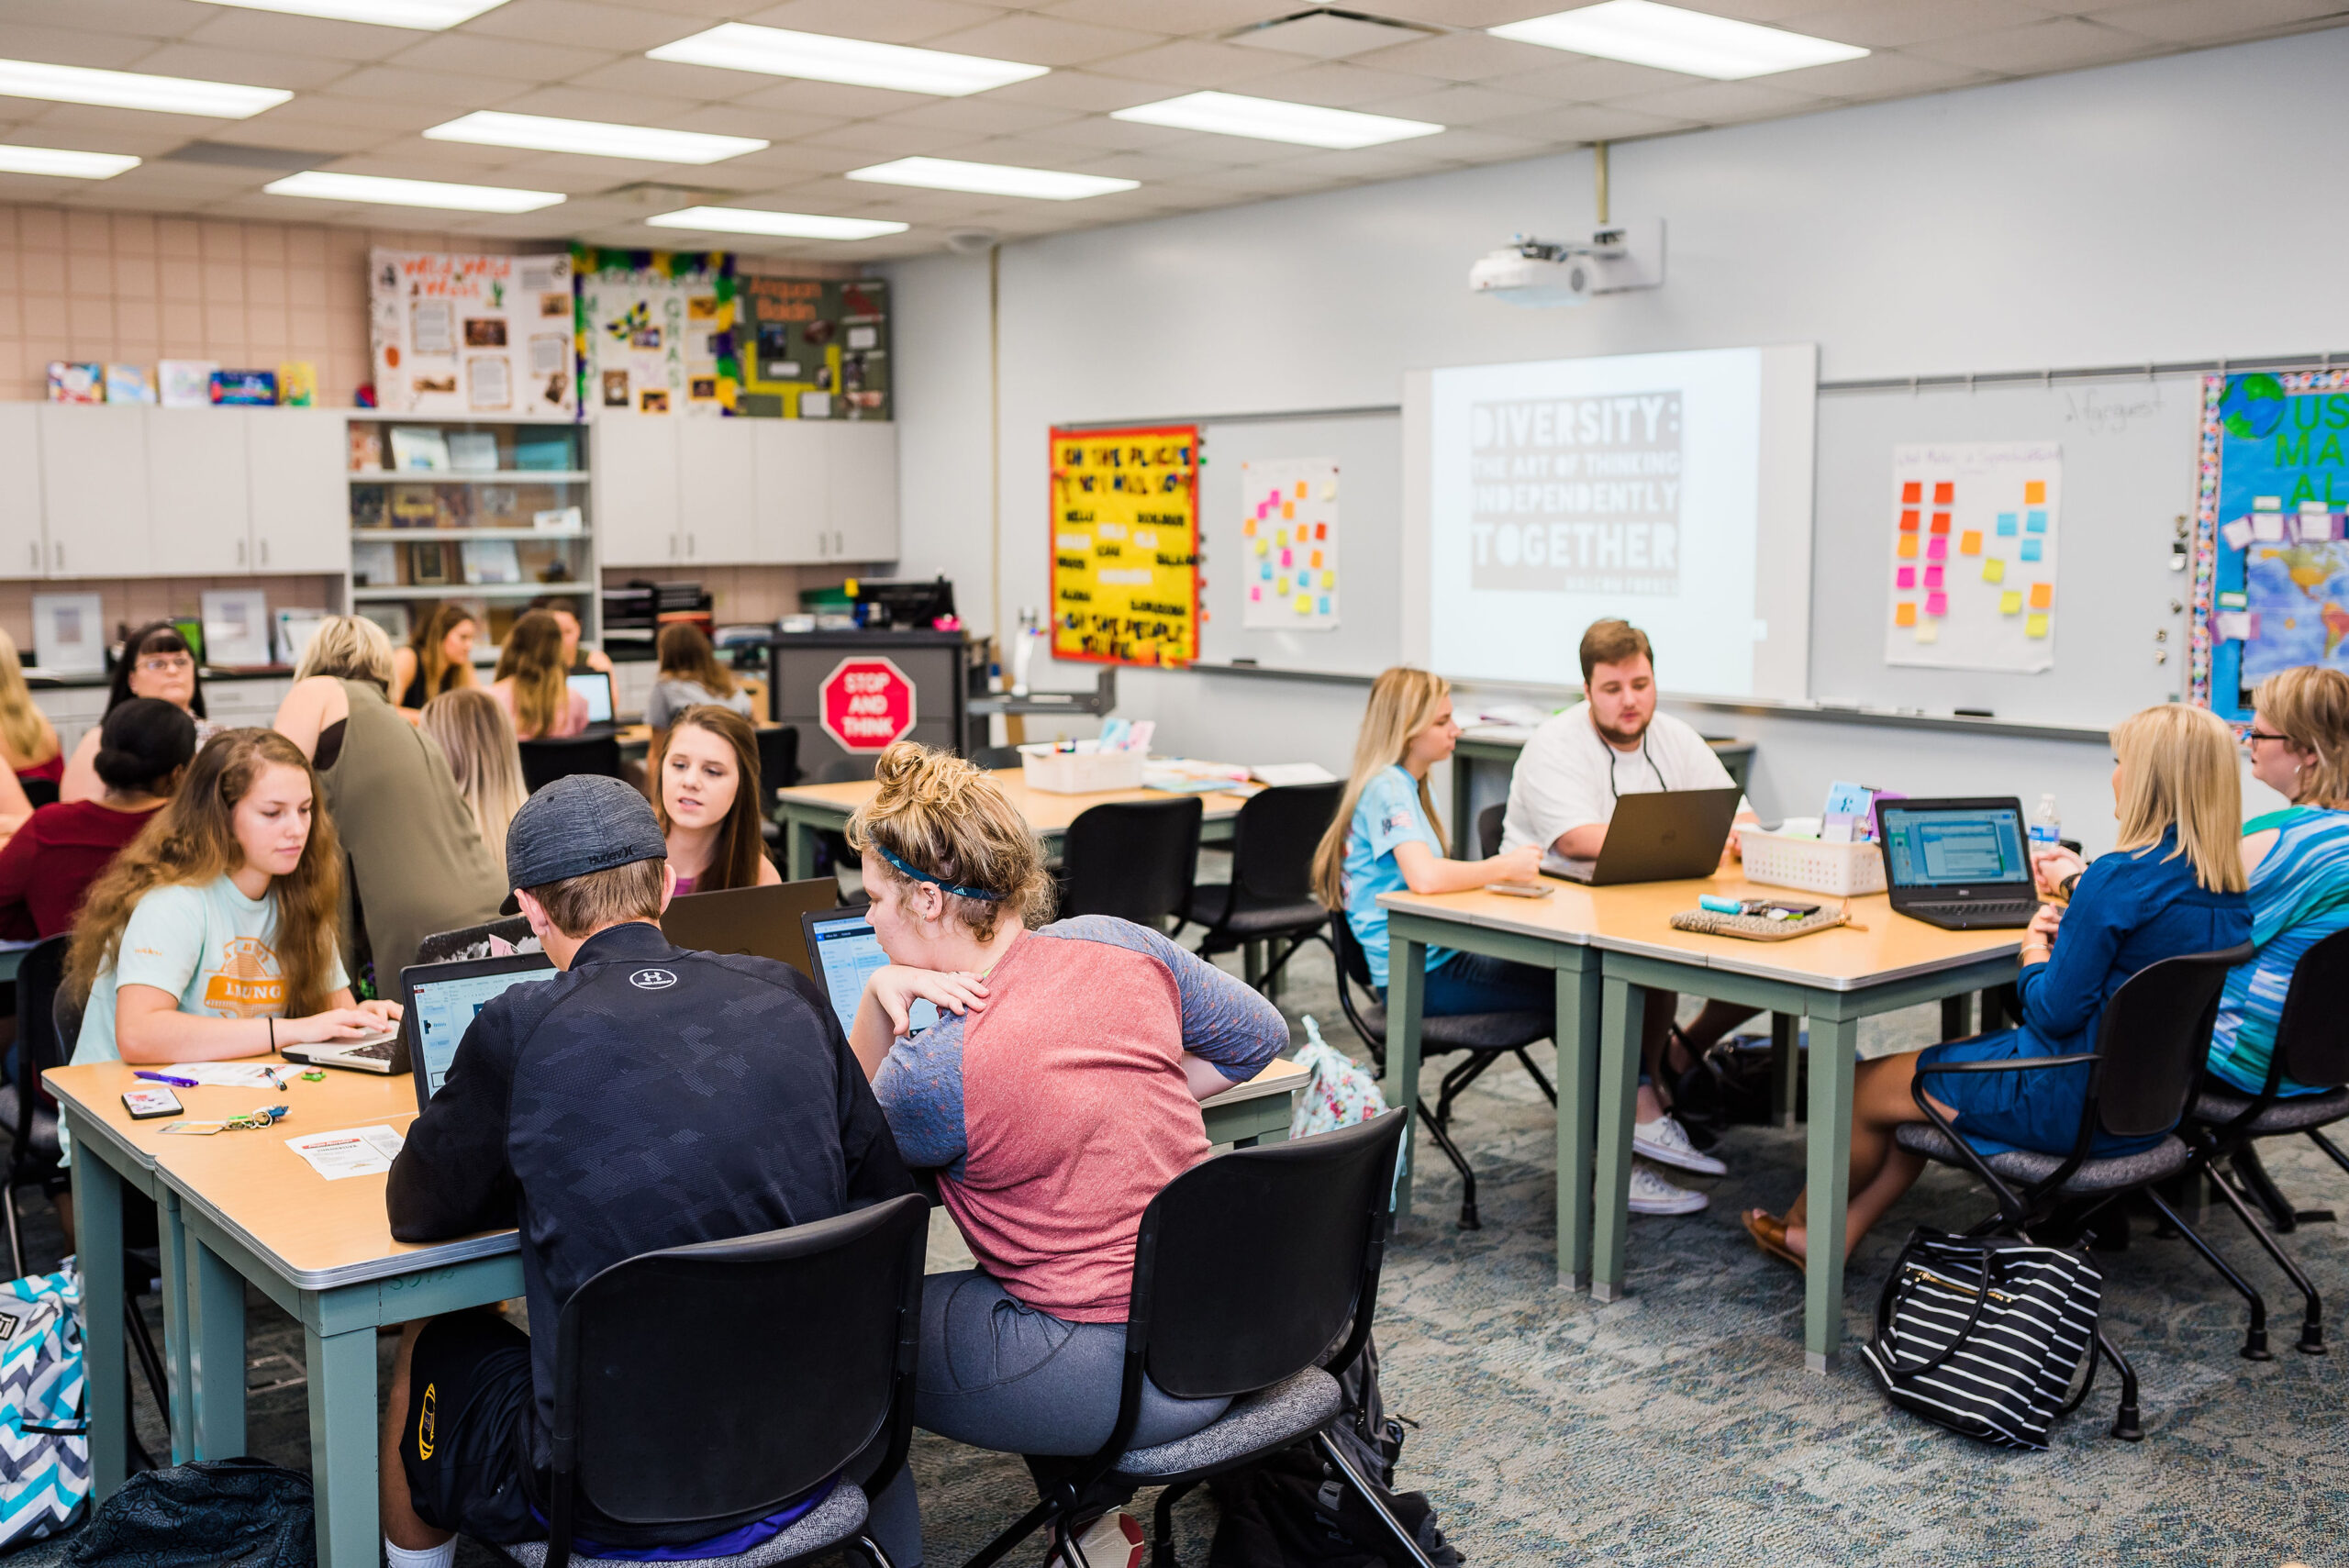 FGC to offer Bachelor’s in Elementary Education beginning in Fall 2020